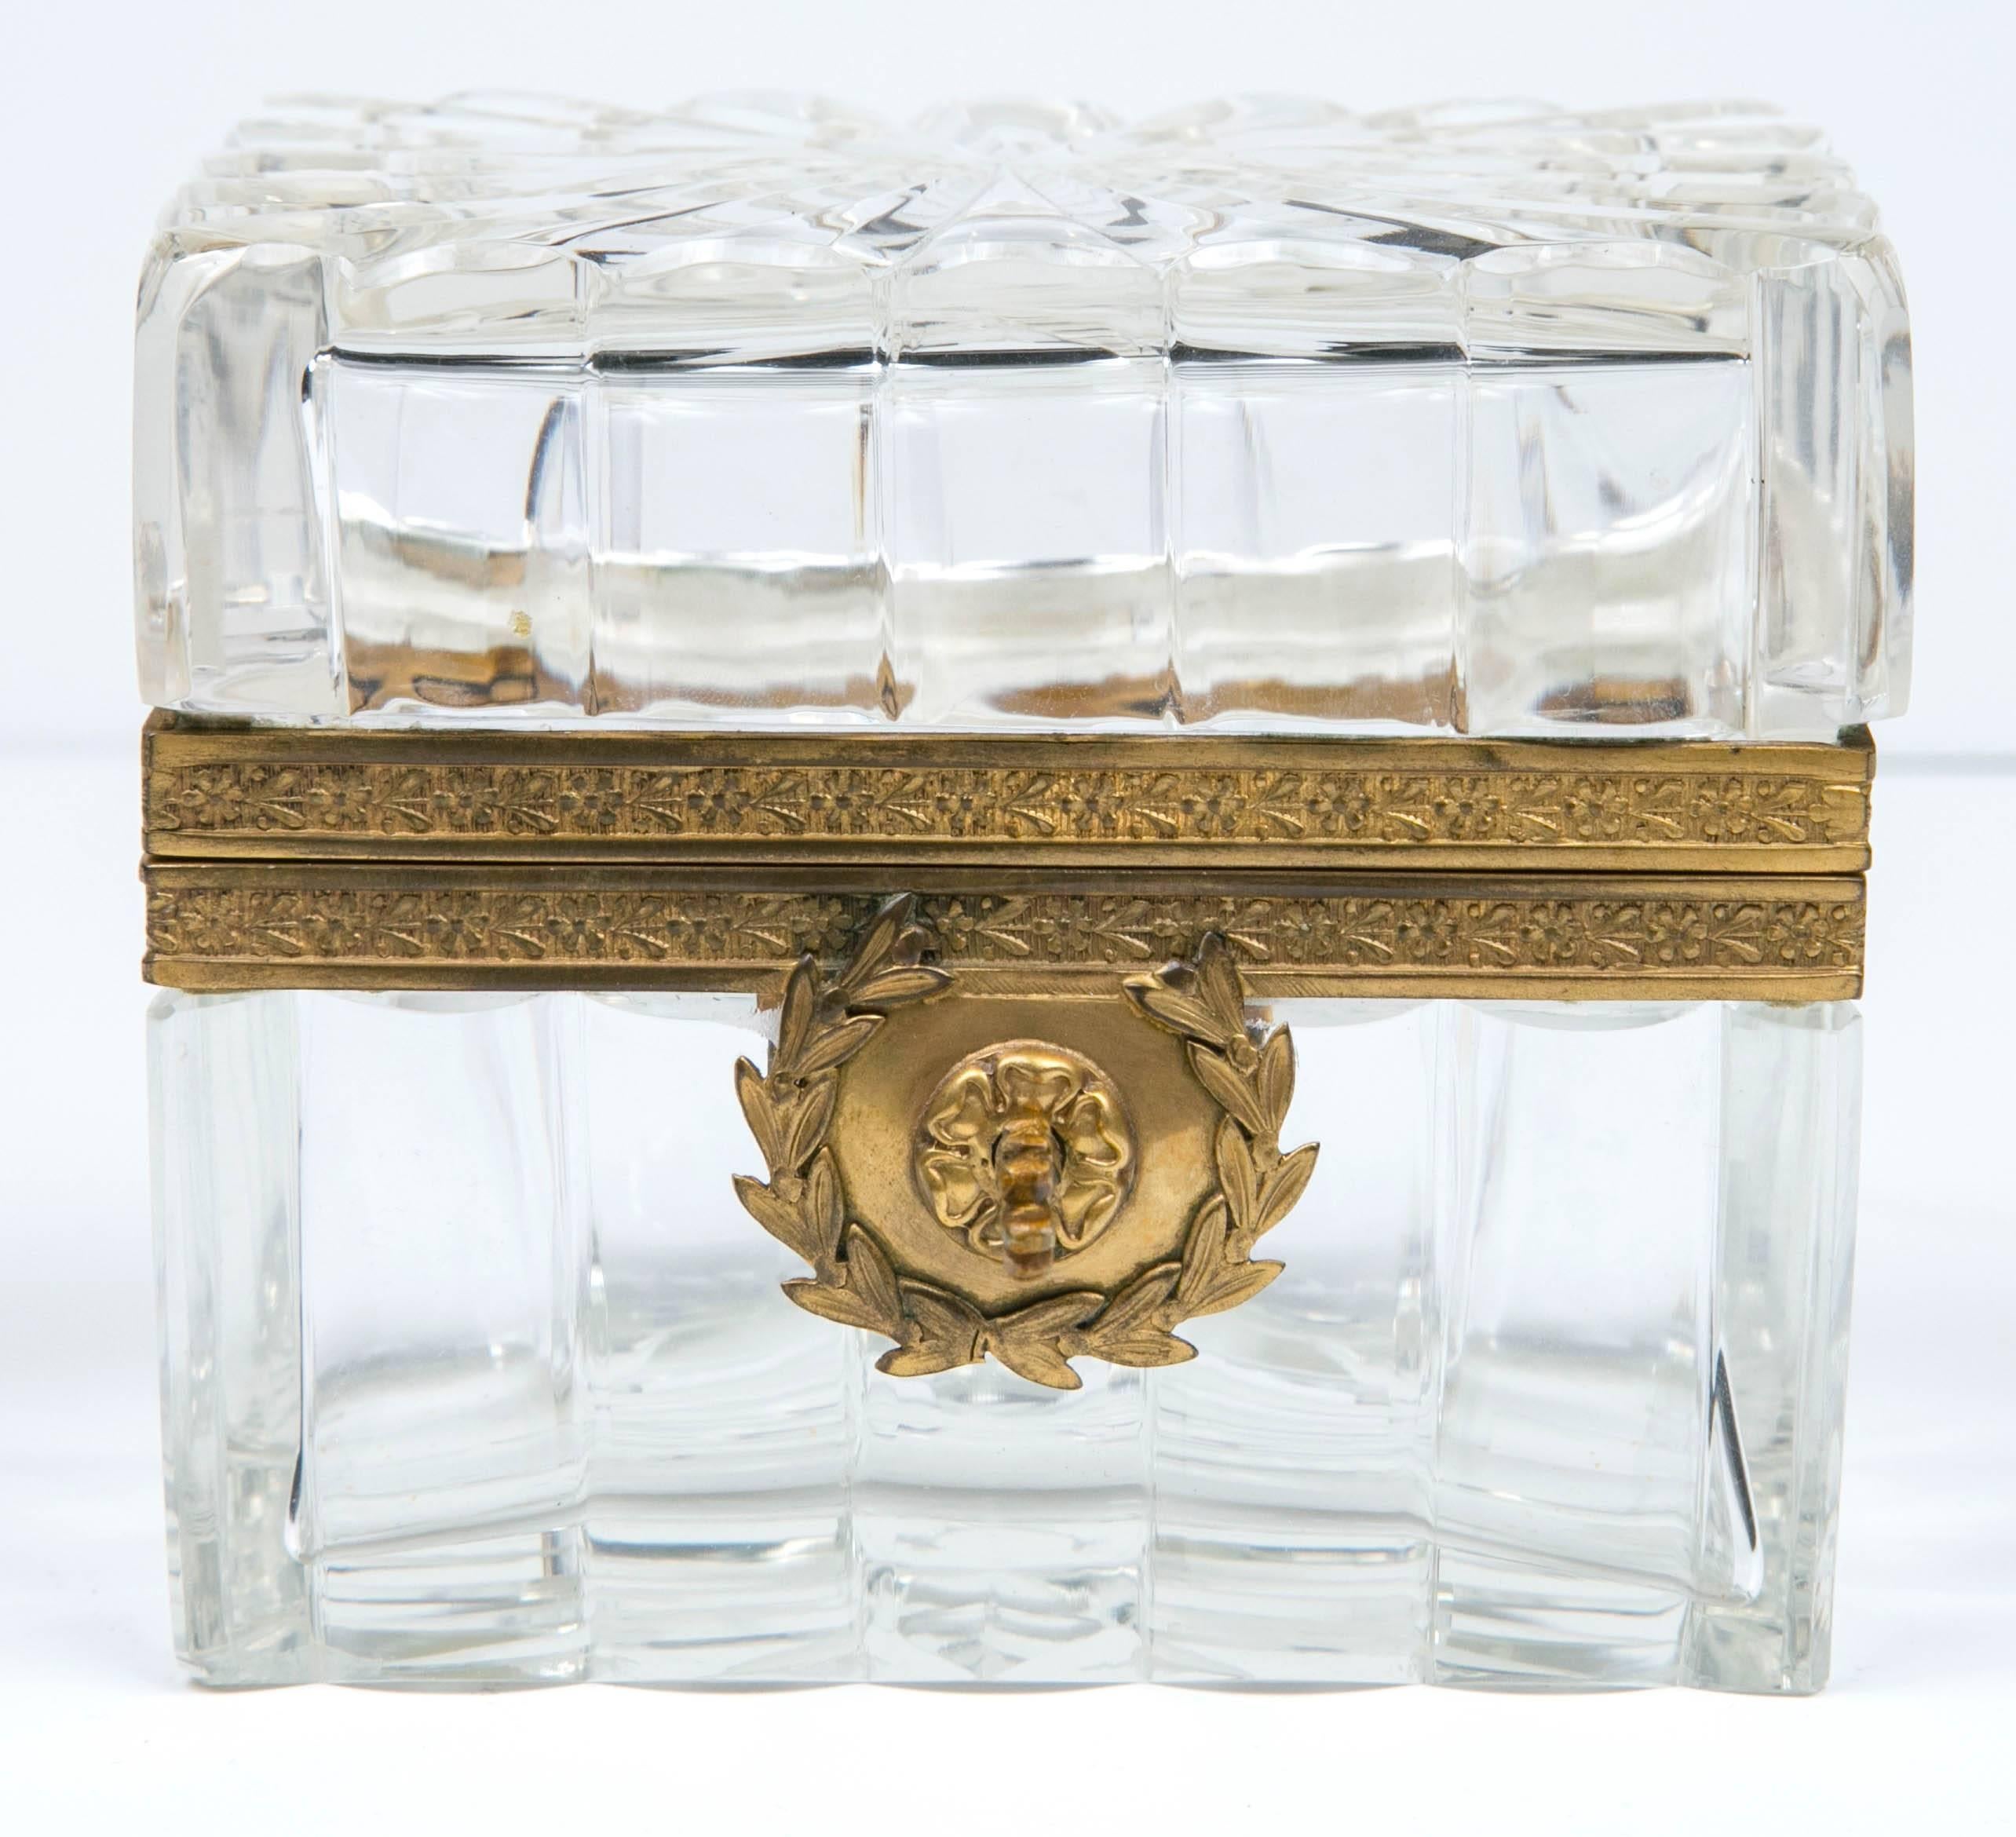 French cut crystal box with bronze detail. Box includes key and is in good condition.